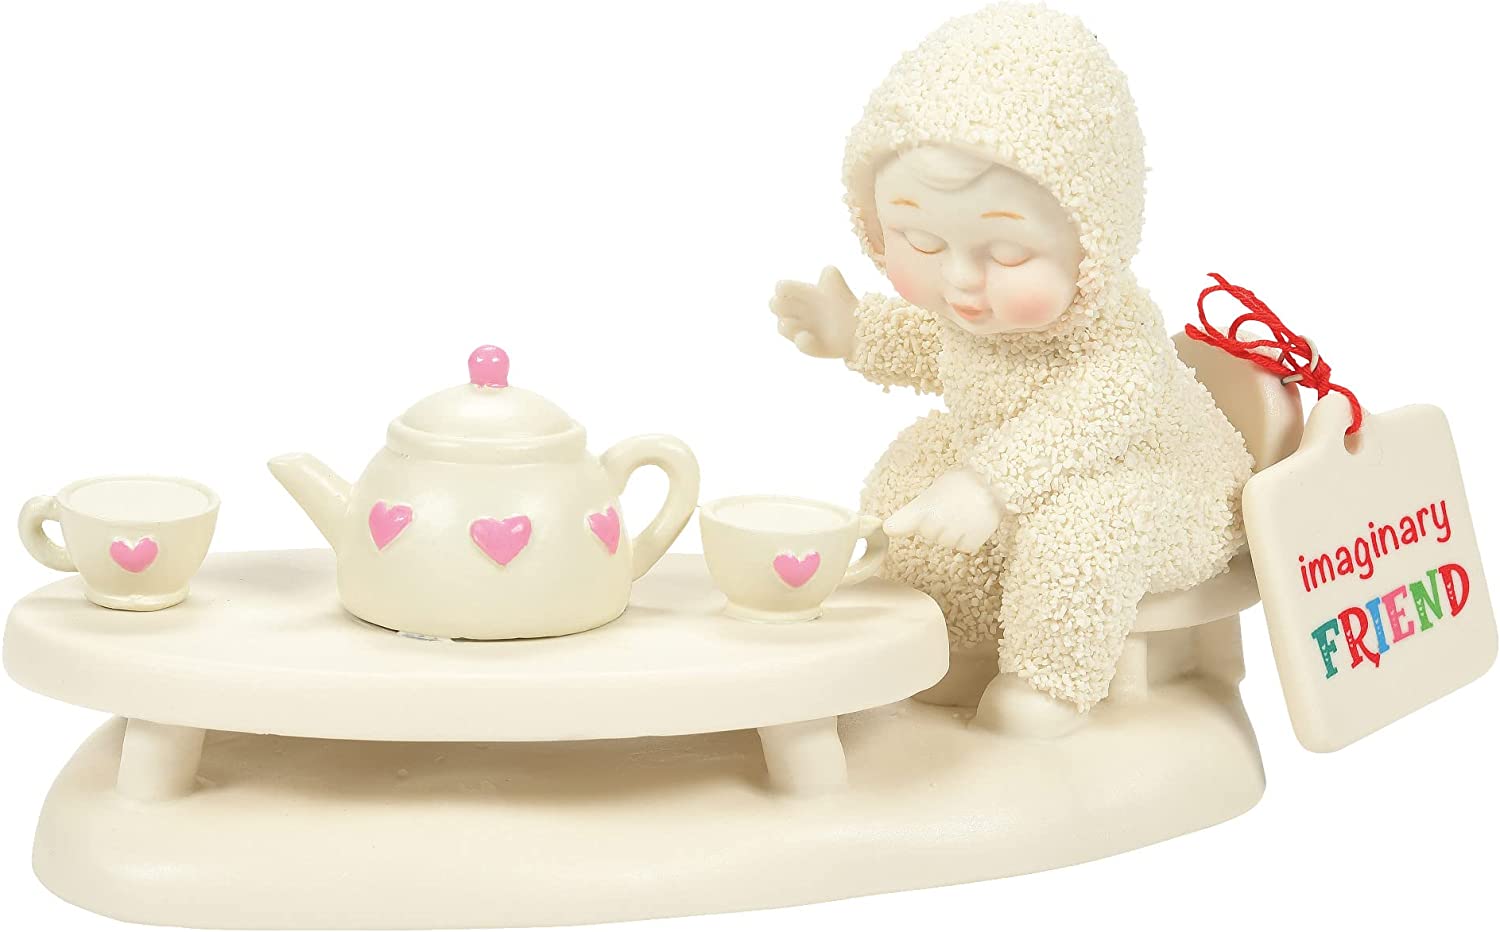 Department 56 Snowbabies Awesome Imaginary Friend Figurine